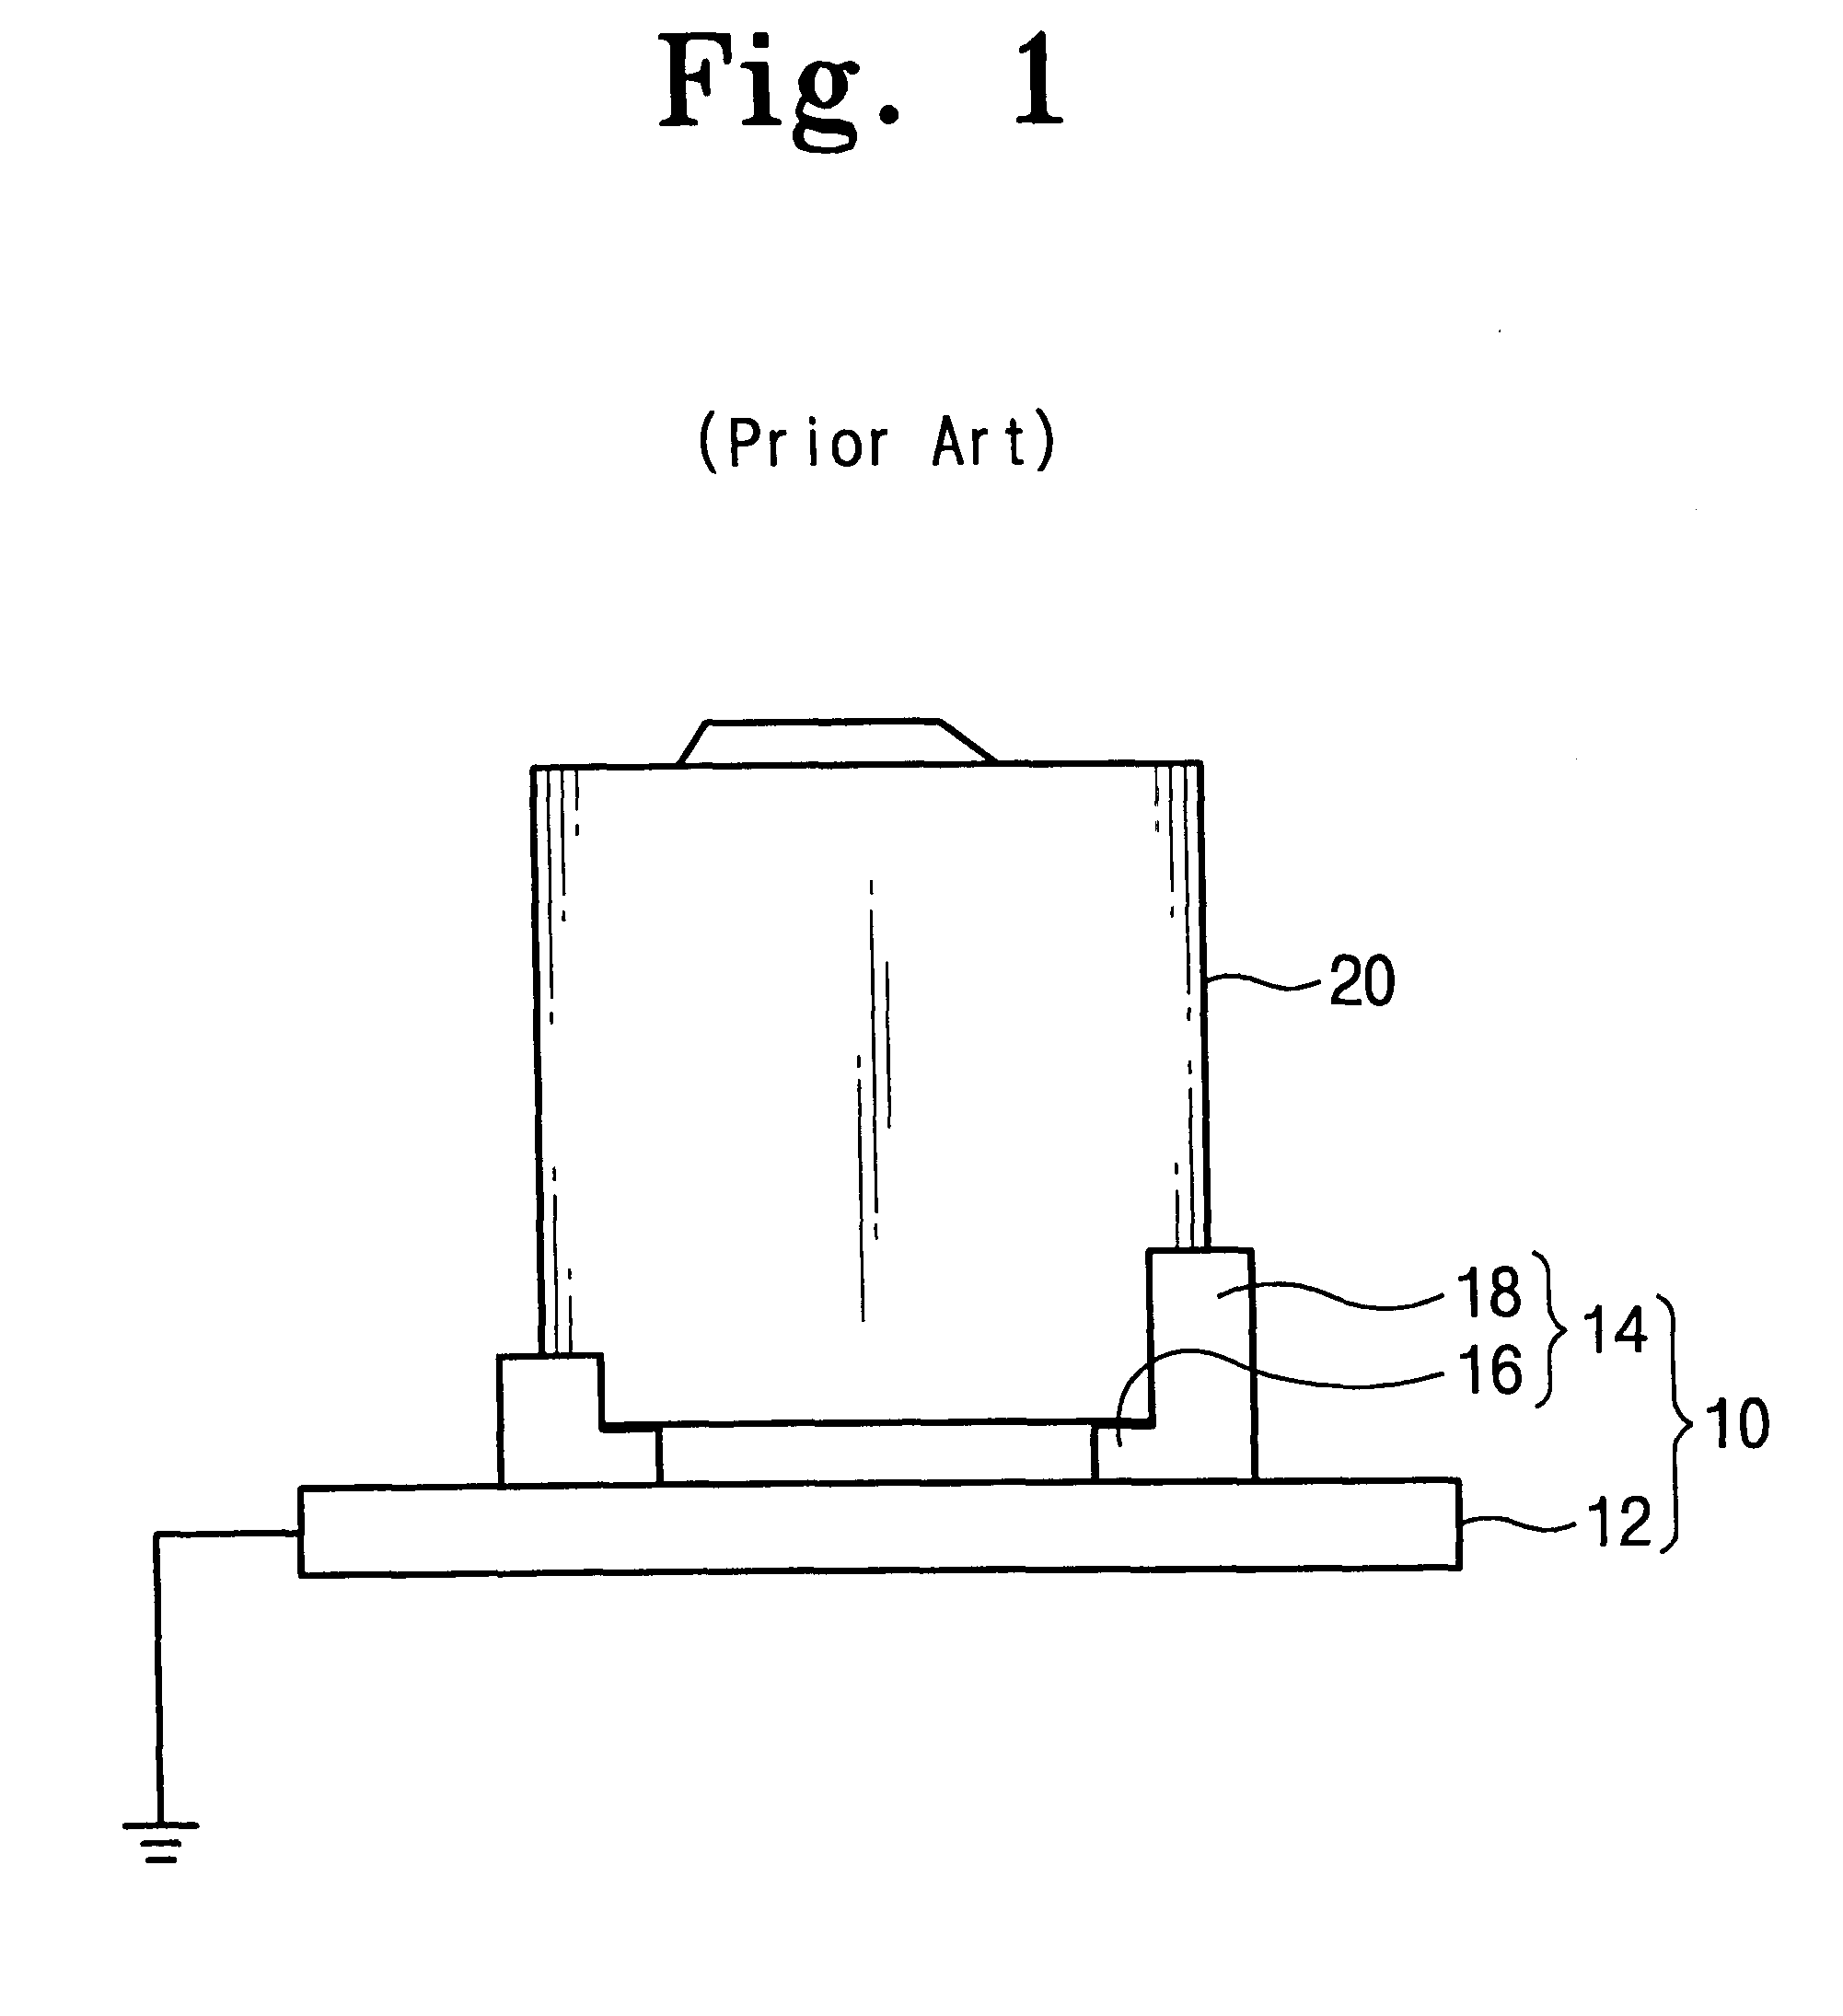 Cassette table of a semiconductor fabricating apparatus